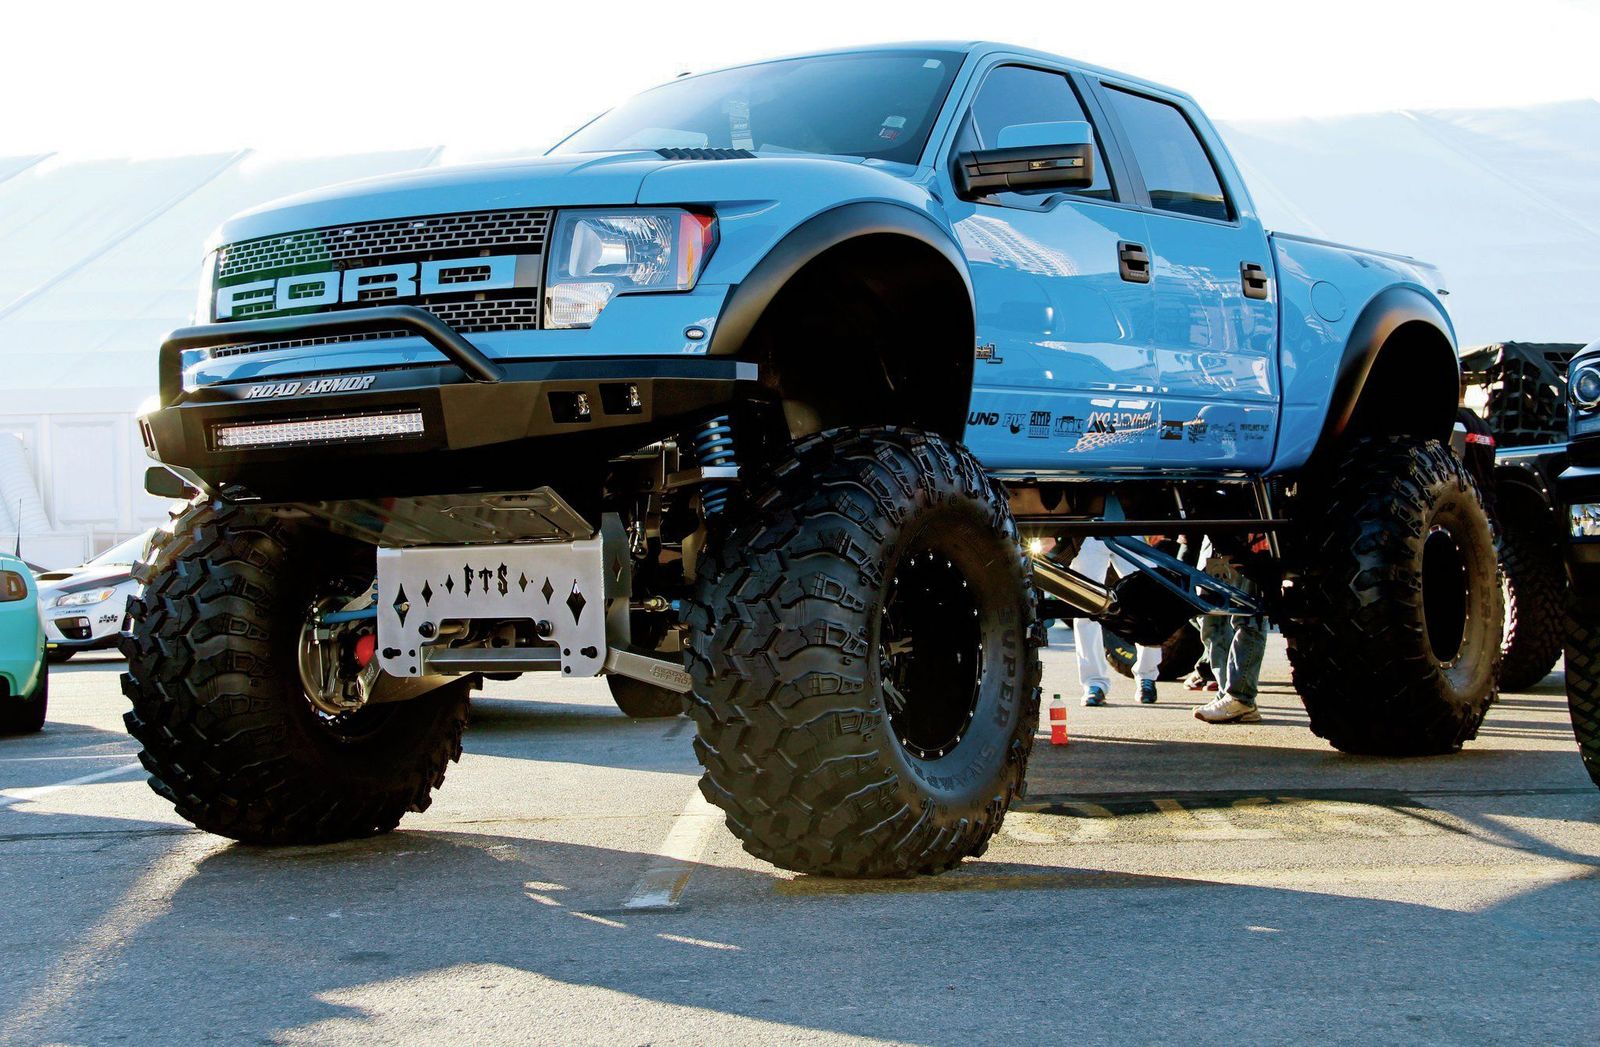 fted-Trucks-For-Sale-Alabama-Lifted-Trucks-For-Sale-Austin-Tx-Lifted-Trucks-For-Sale-Albuquerque.jpg